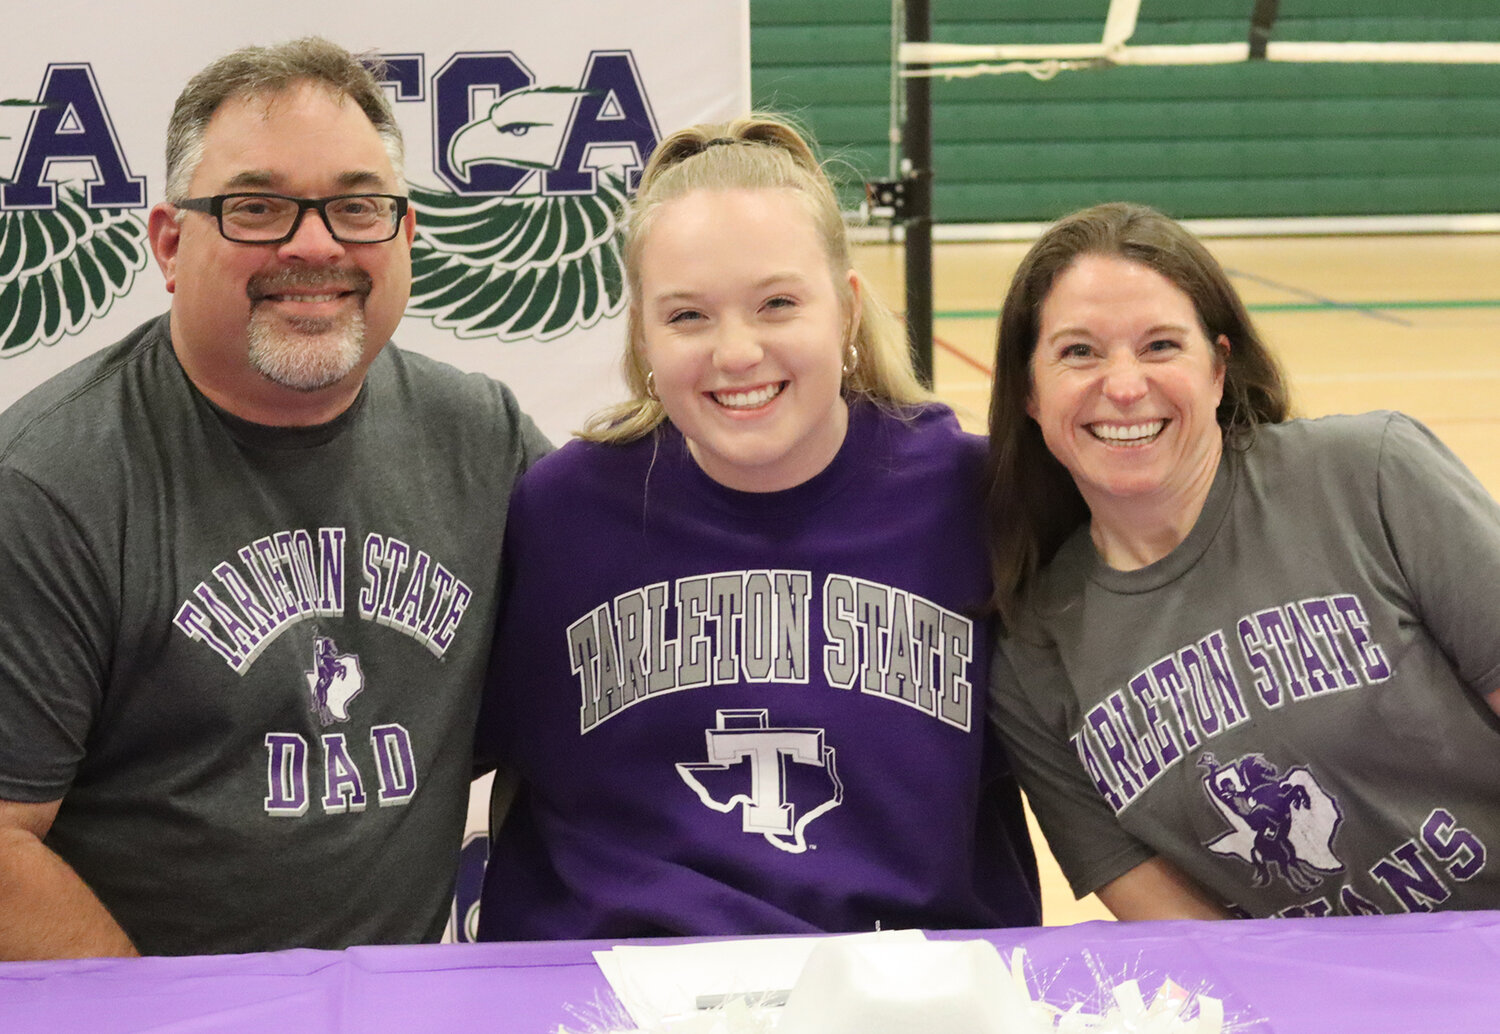 Abby James is shown with her parents as she signed to be on the cheerleading squad at Tarleton State University.